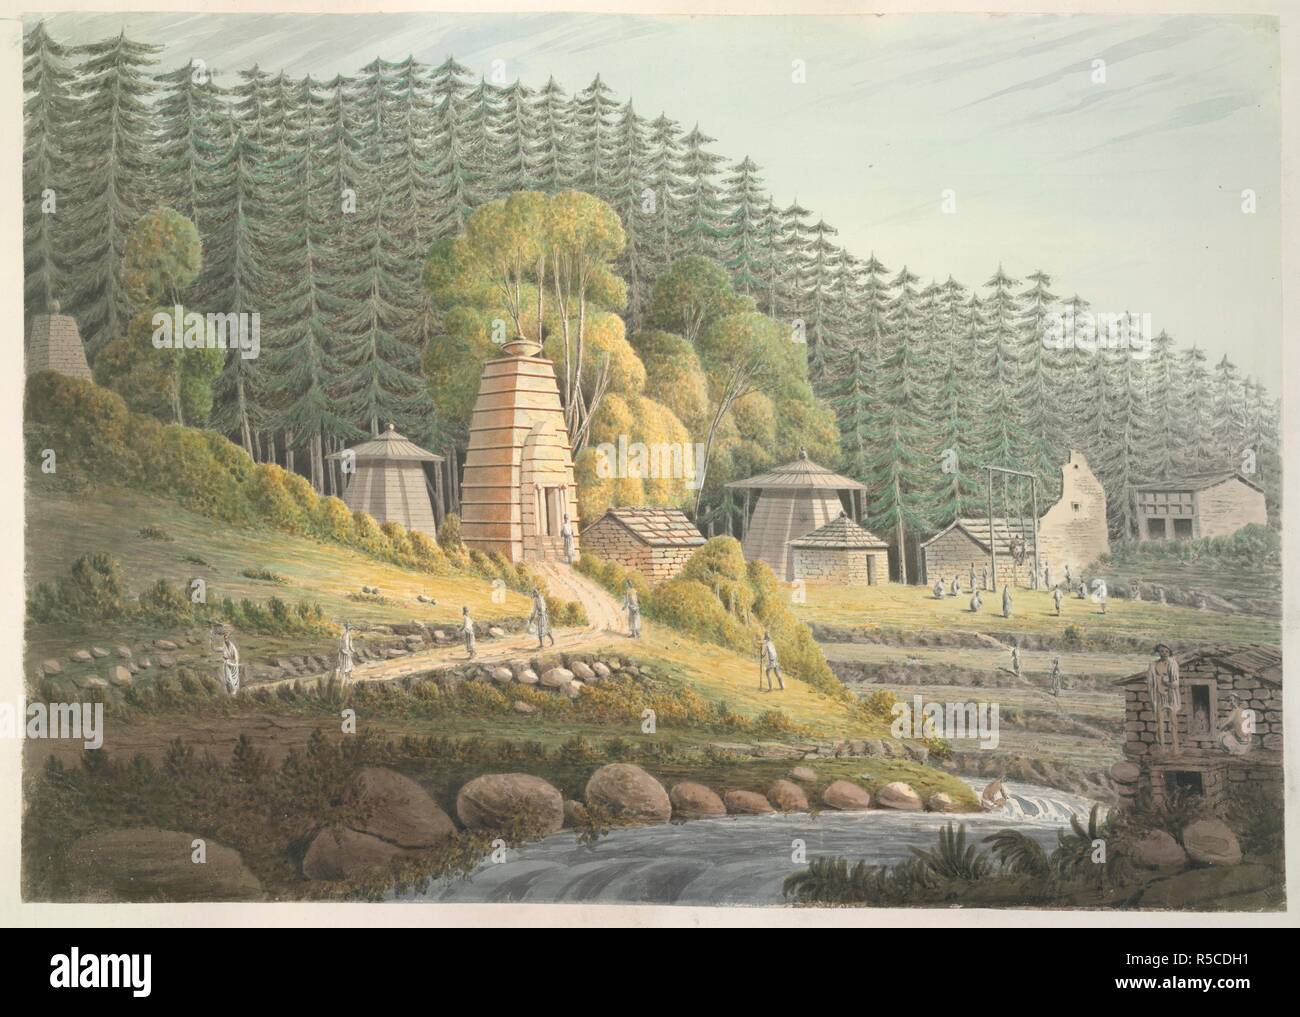 Hindu Temples. c.1826. A view of Hindu temples at Jagasir (Bagesar), Almora district, Uttar Pradesh, India. One of twelve landscapes in Almora - (U.P). Inscribed on back in ink with titles. Watercolour.  Originally published/produced in c.1826. . Source: WD 543, f.3. Author: Manson, James. Stock Photo